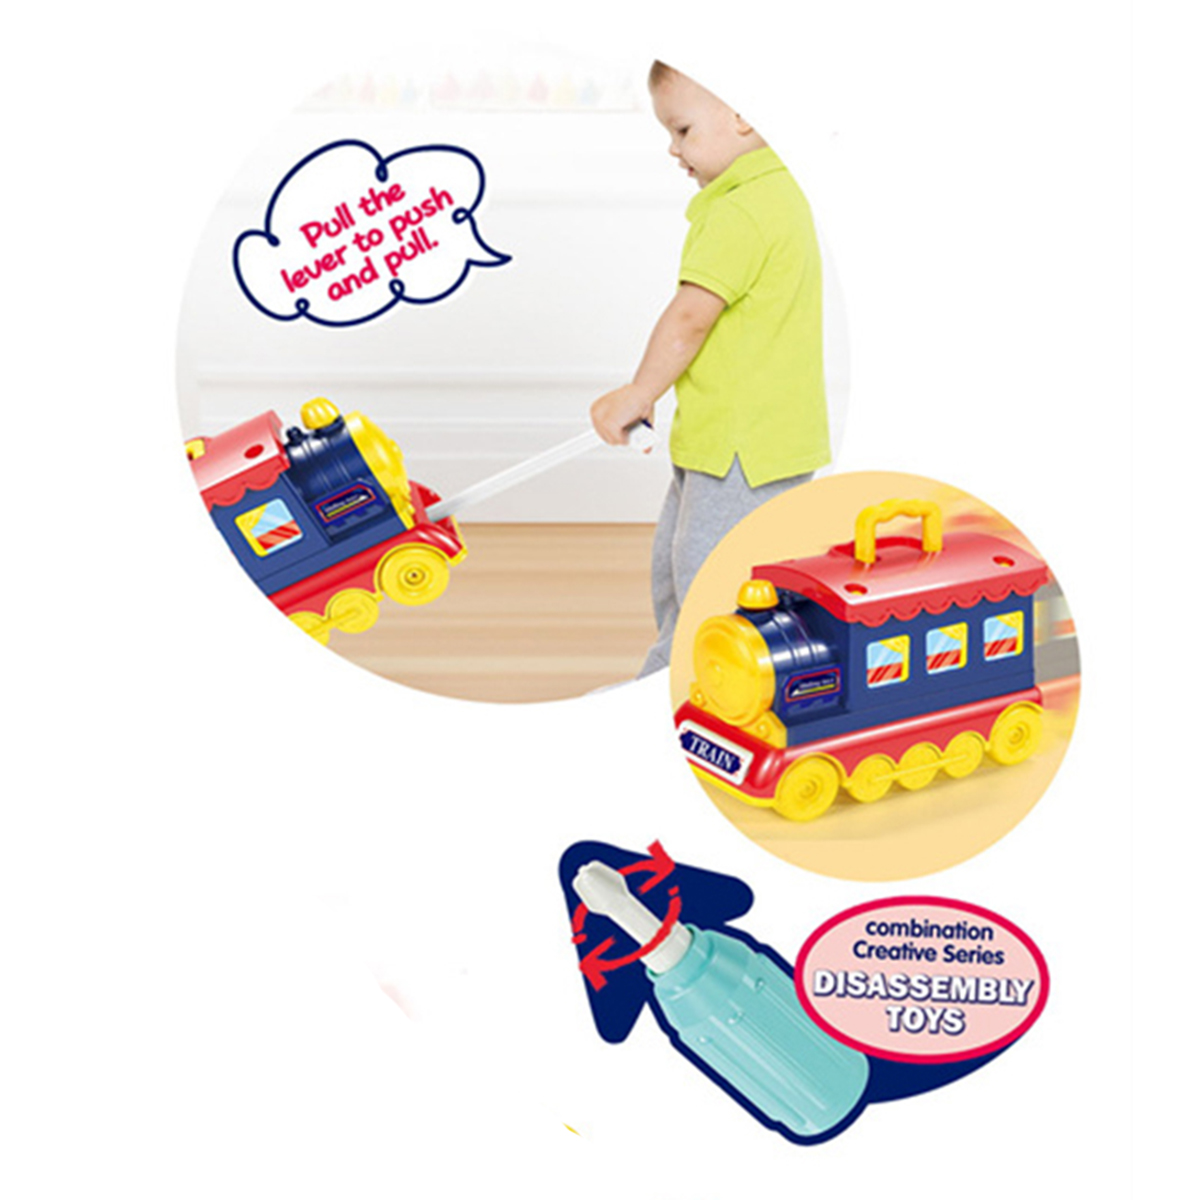 2-IN-1-Multi-style-Kitchen-Cooking-Play-and-Portable-Small-Train-Learning-Set-Toys-for-Kids-Gift-1673927-7